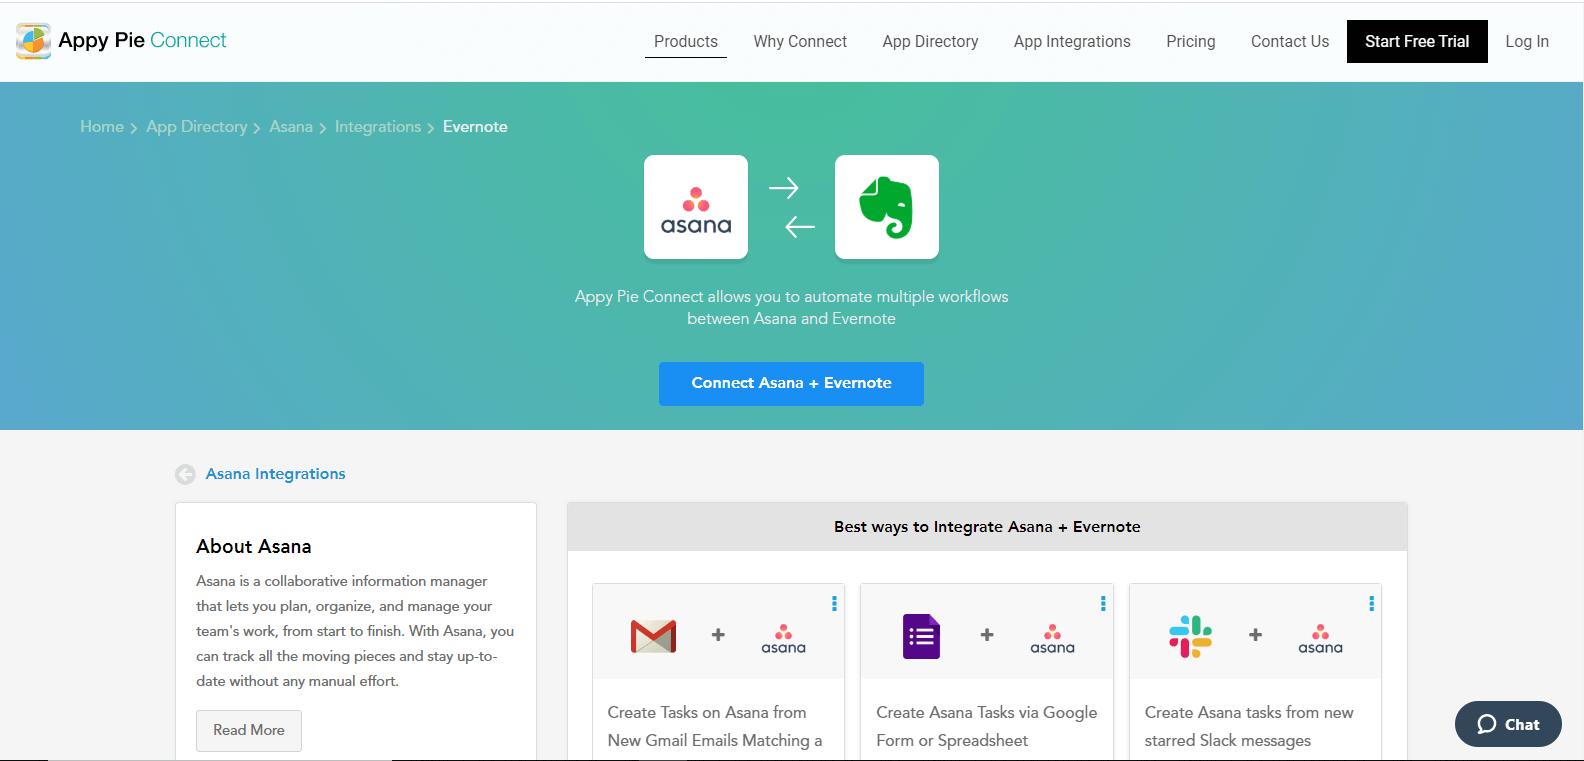 Connect Asana integration with Evernote - Appy Pie